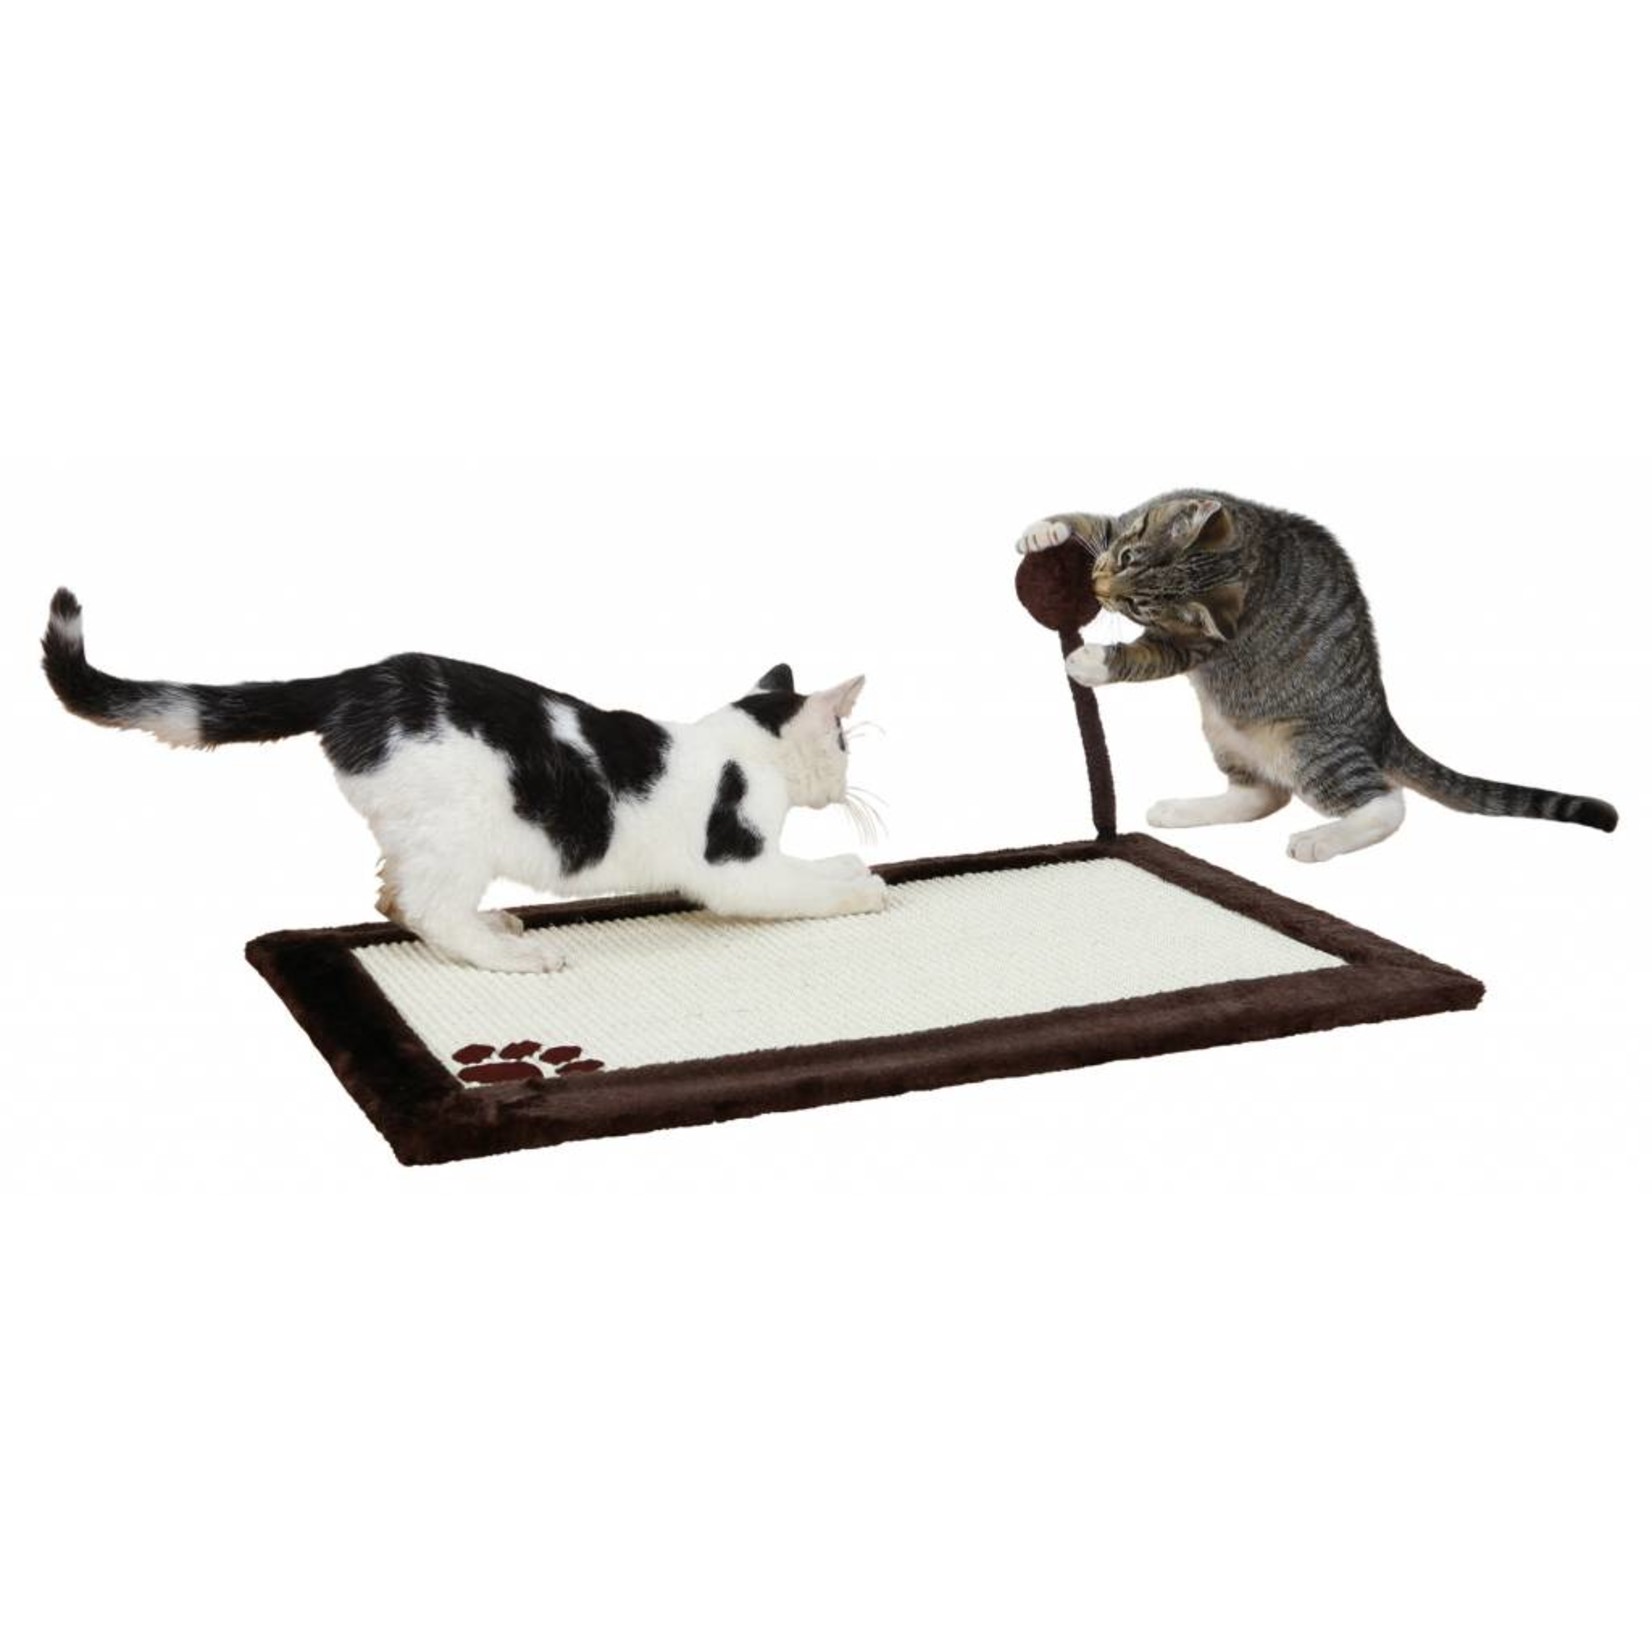 Trixie Cat Scratching Mat with Plush Border, Brown, 70 x 45cm